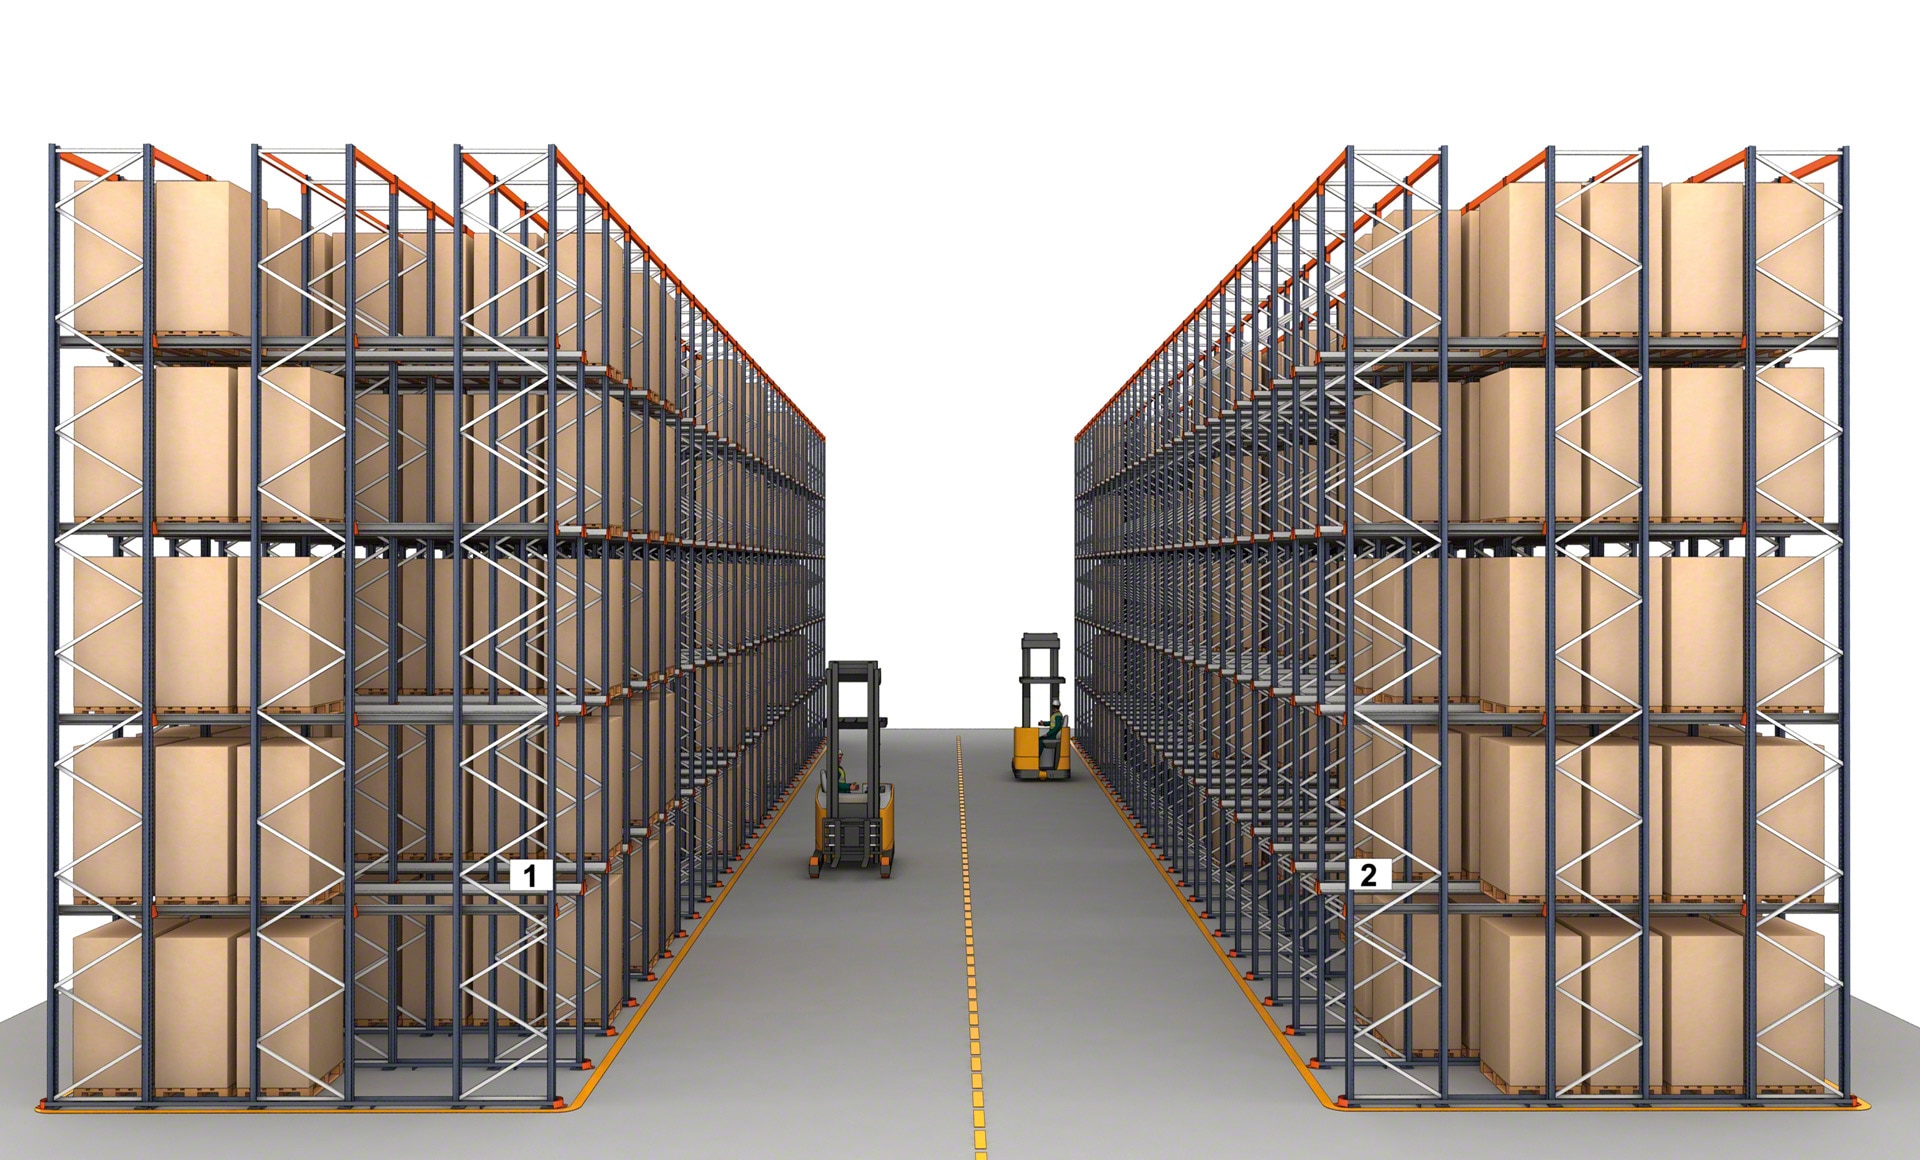 In drive-in warehouses, the use of guide rails is essential to ensure operator safety